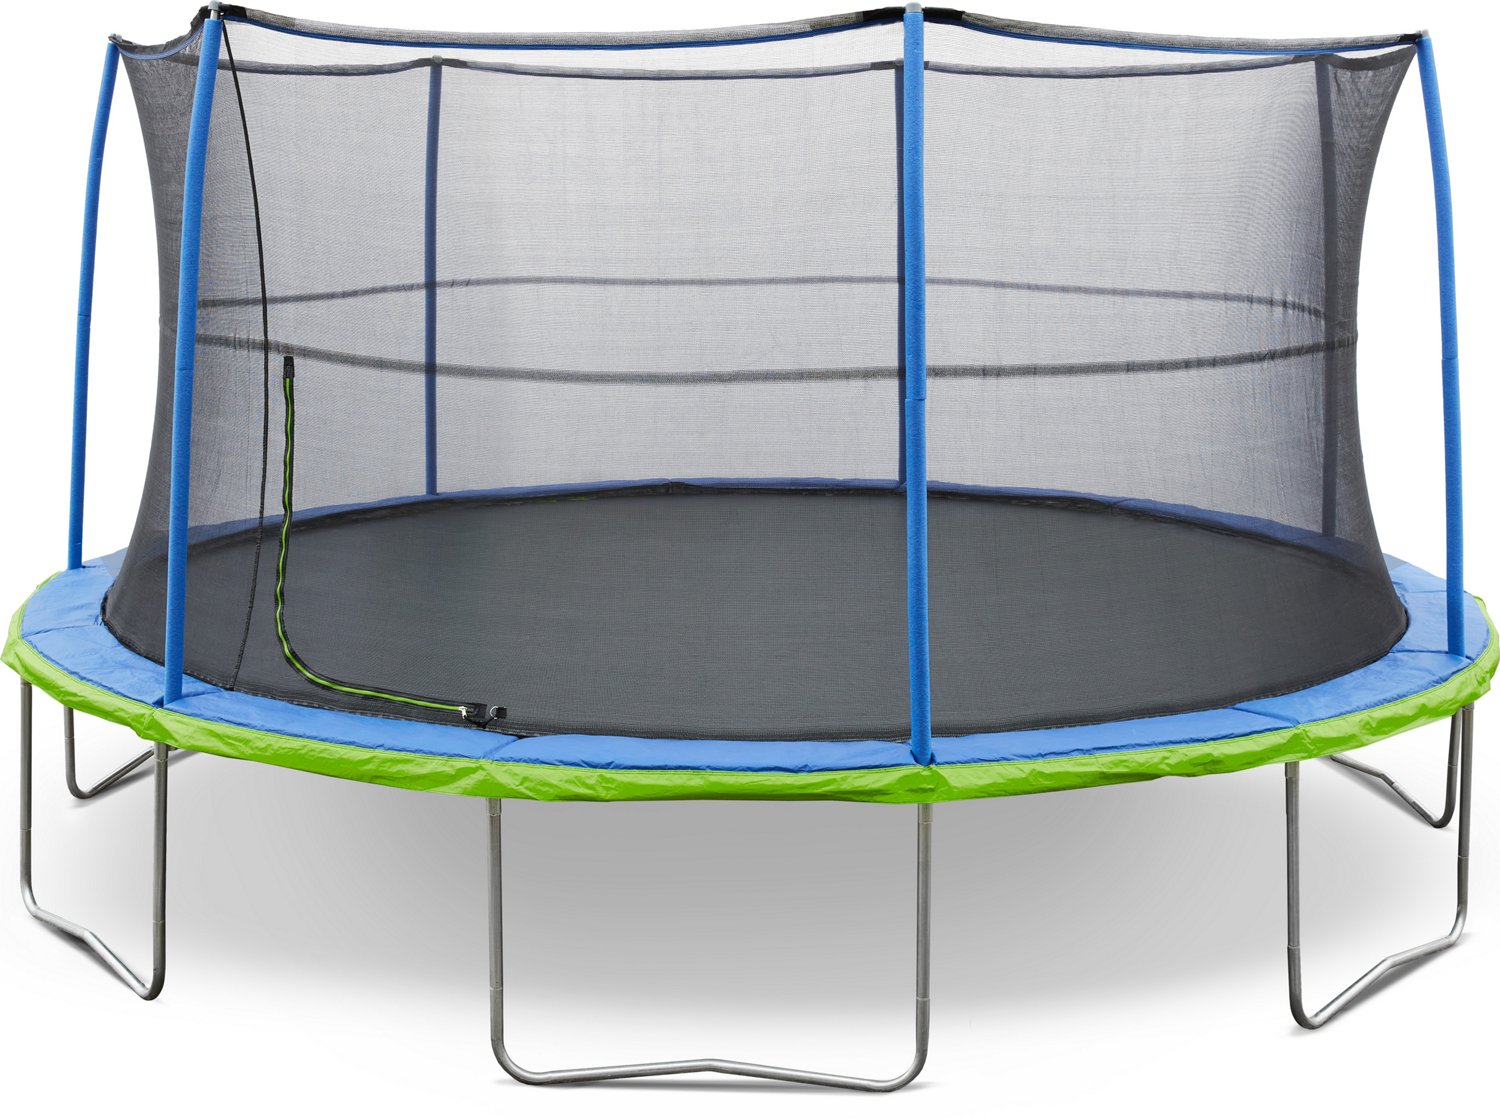 What Is The Average Price Of A Trampoline?